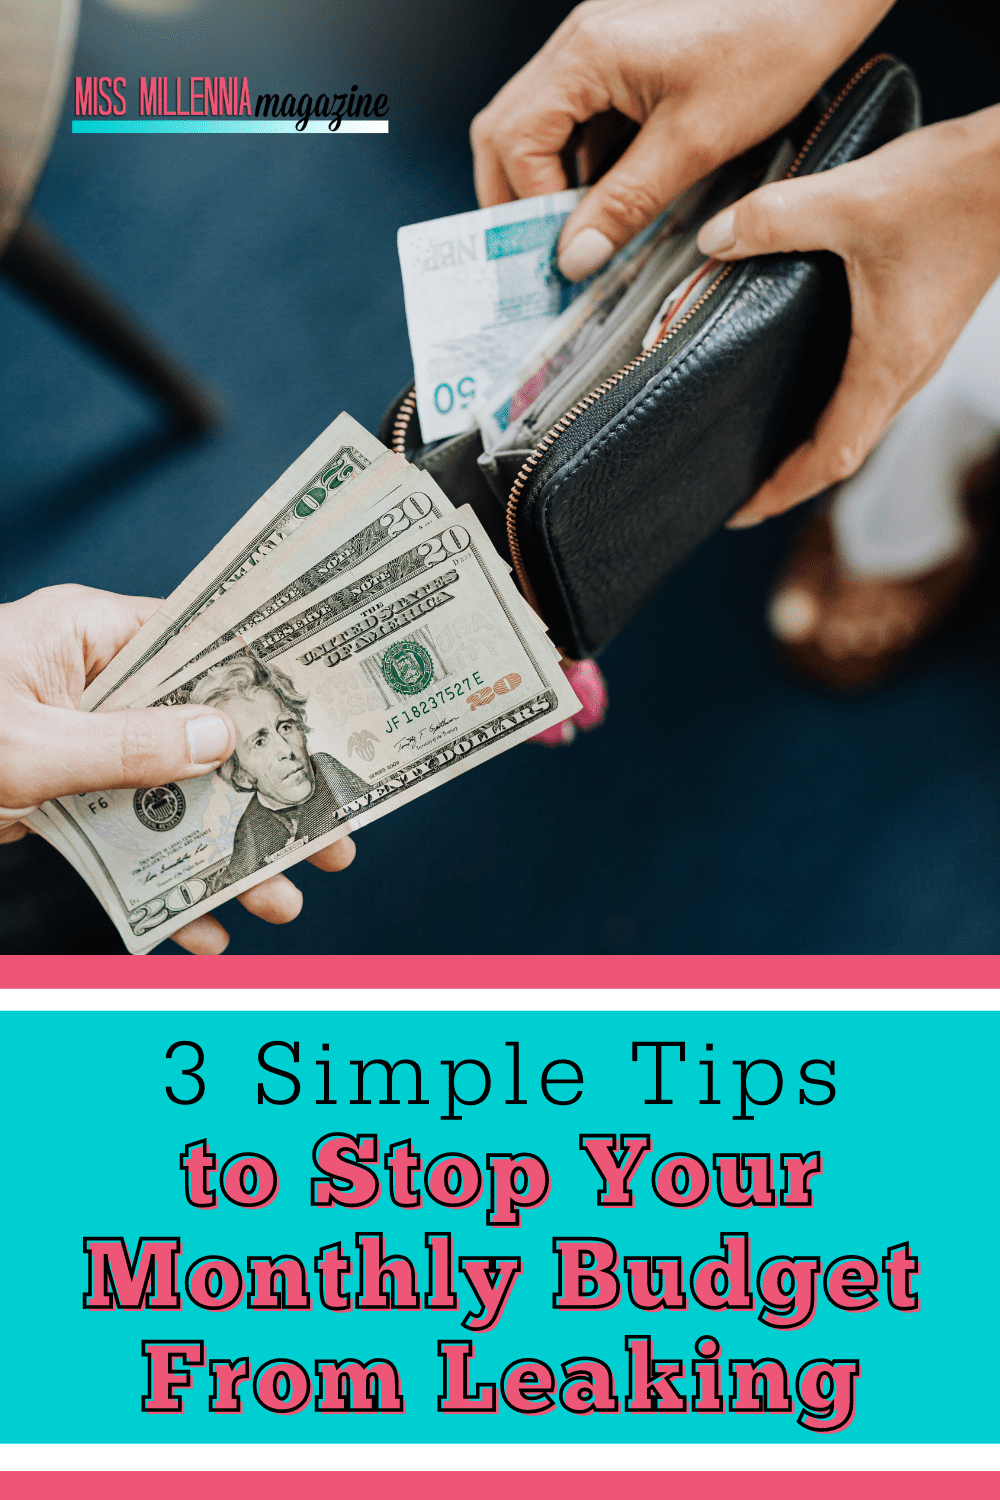 3 Simple Tips to Stop Your Monthly Budget From Leaking